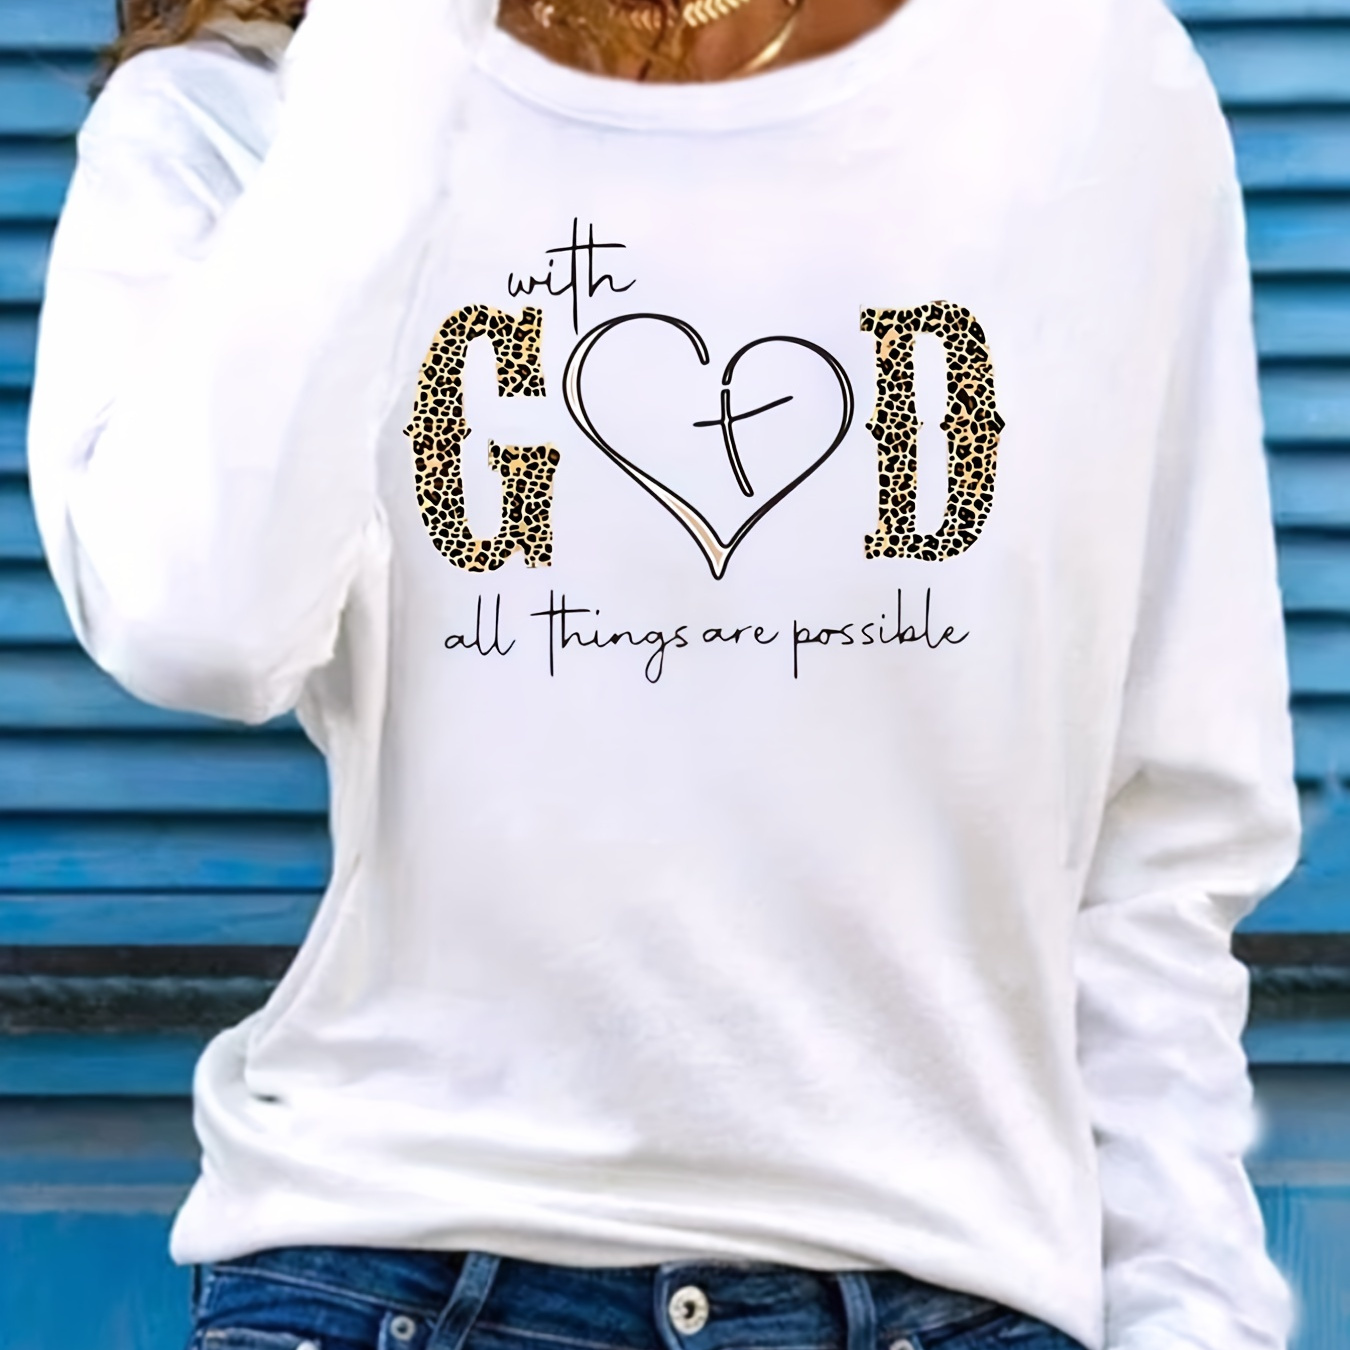 

God Print Crew Neck T-shirt, Casual Long Sleeve T-shirt For Spring & Fall, Women's Clothing